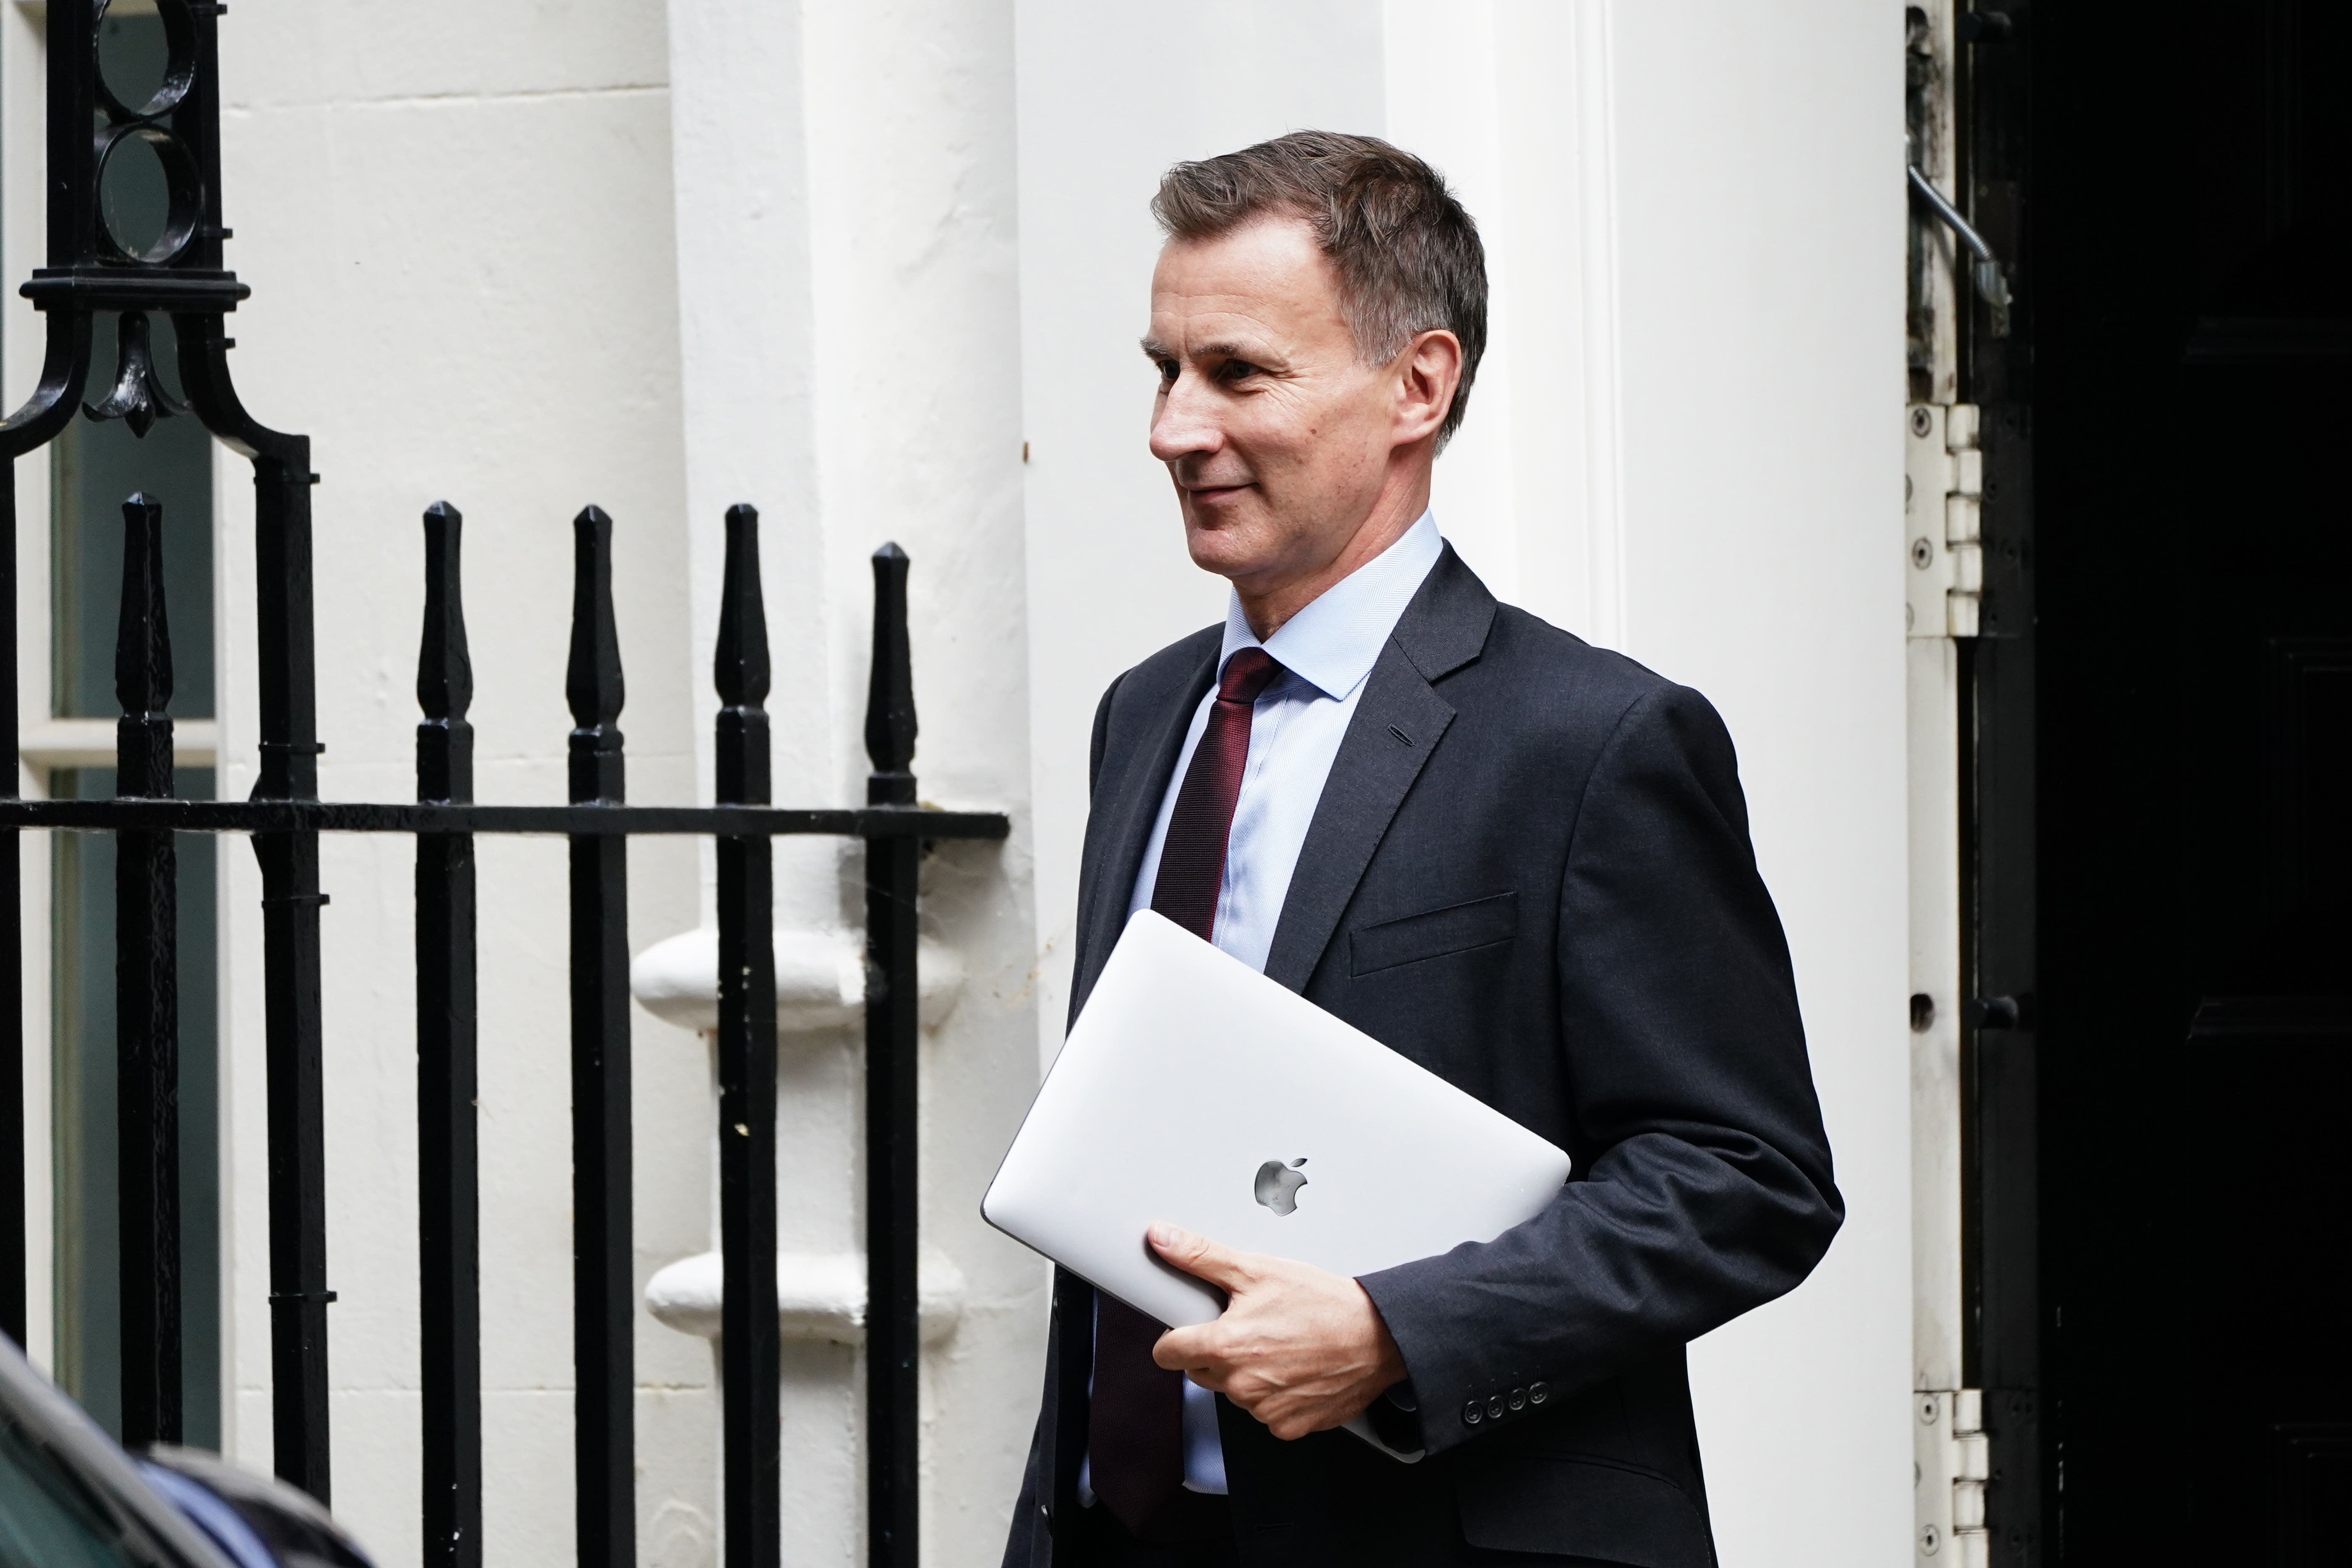 Chancellor Jeremy Hunt says tax cuts are not possible until the economy improves